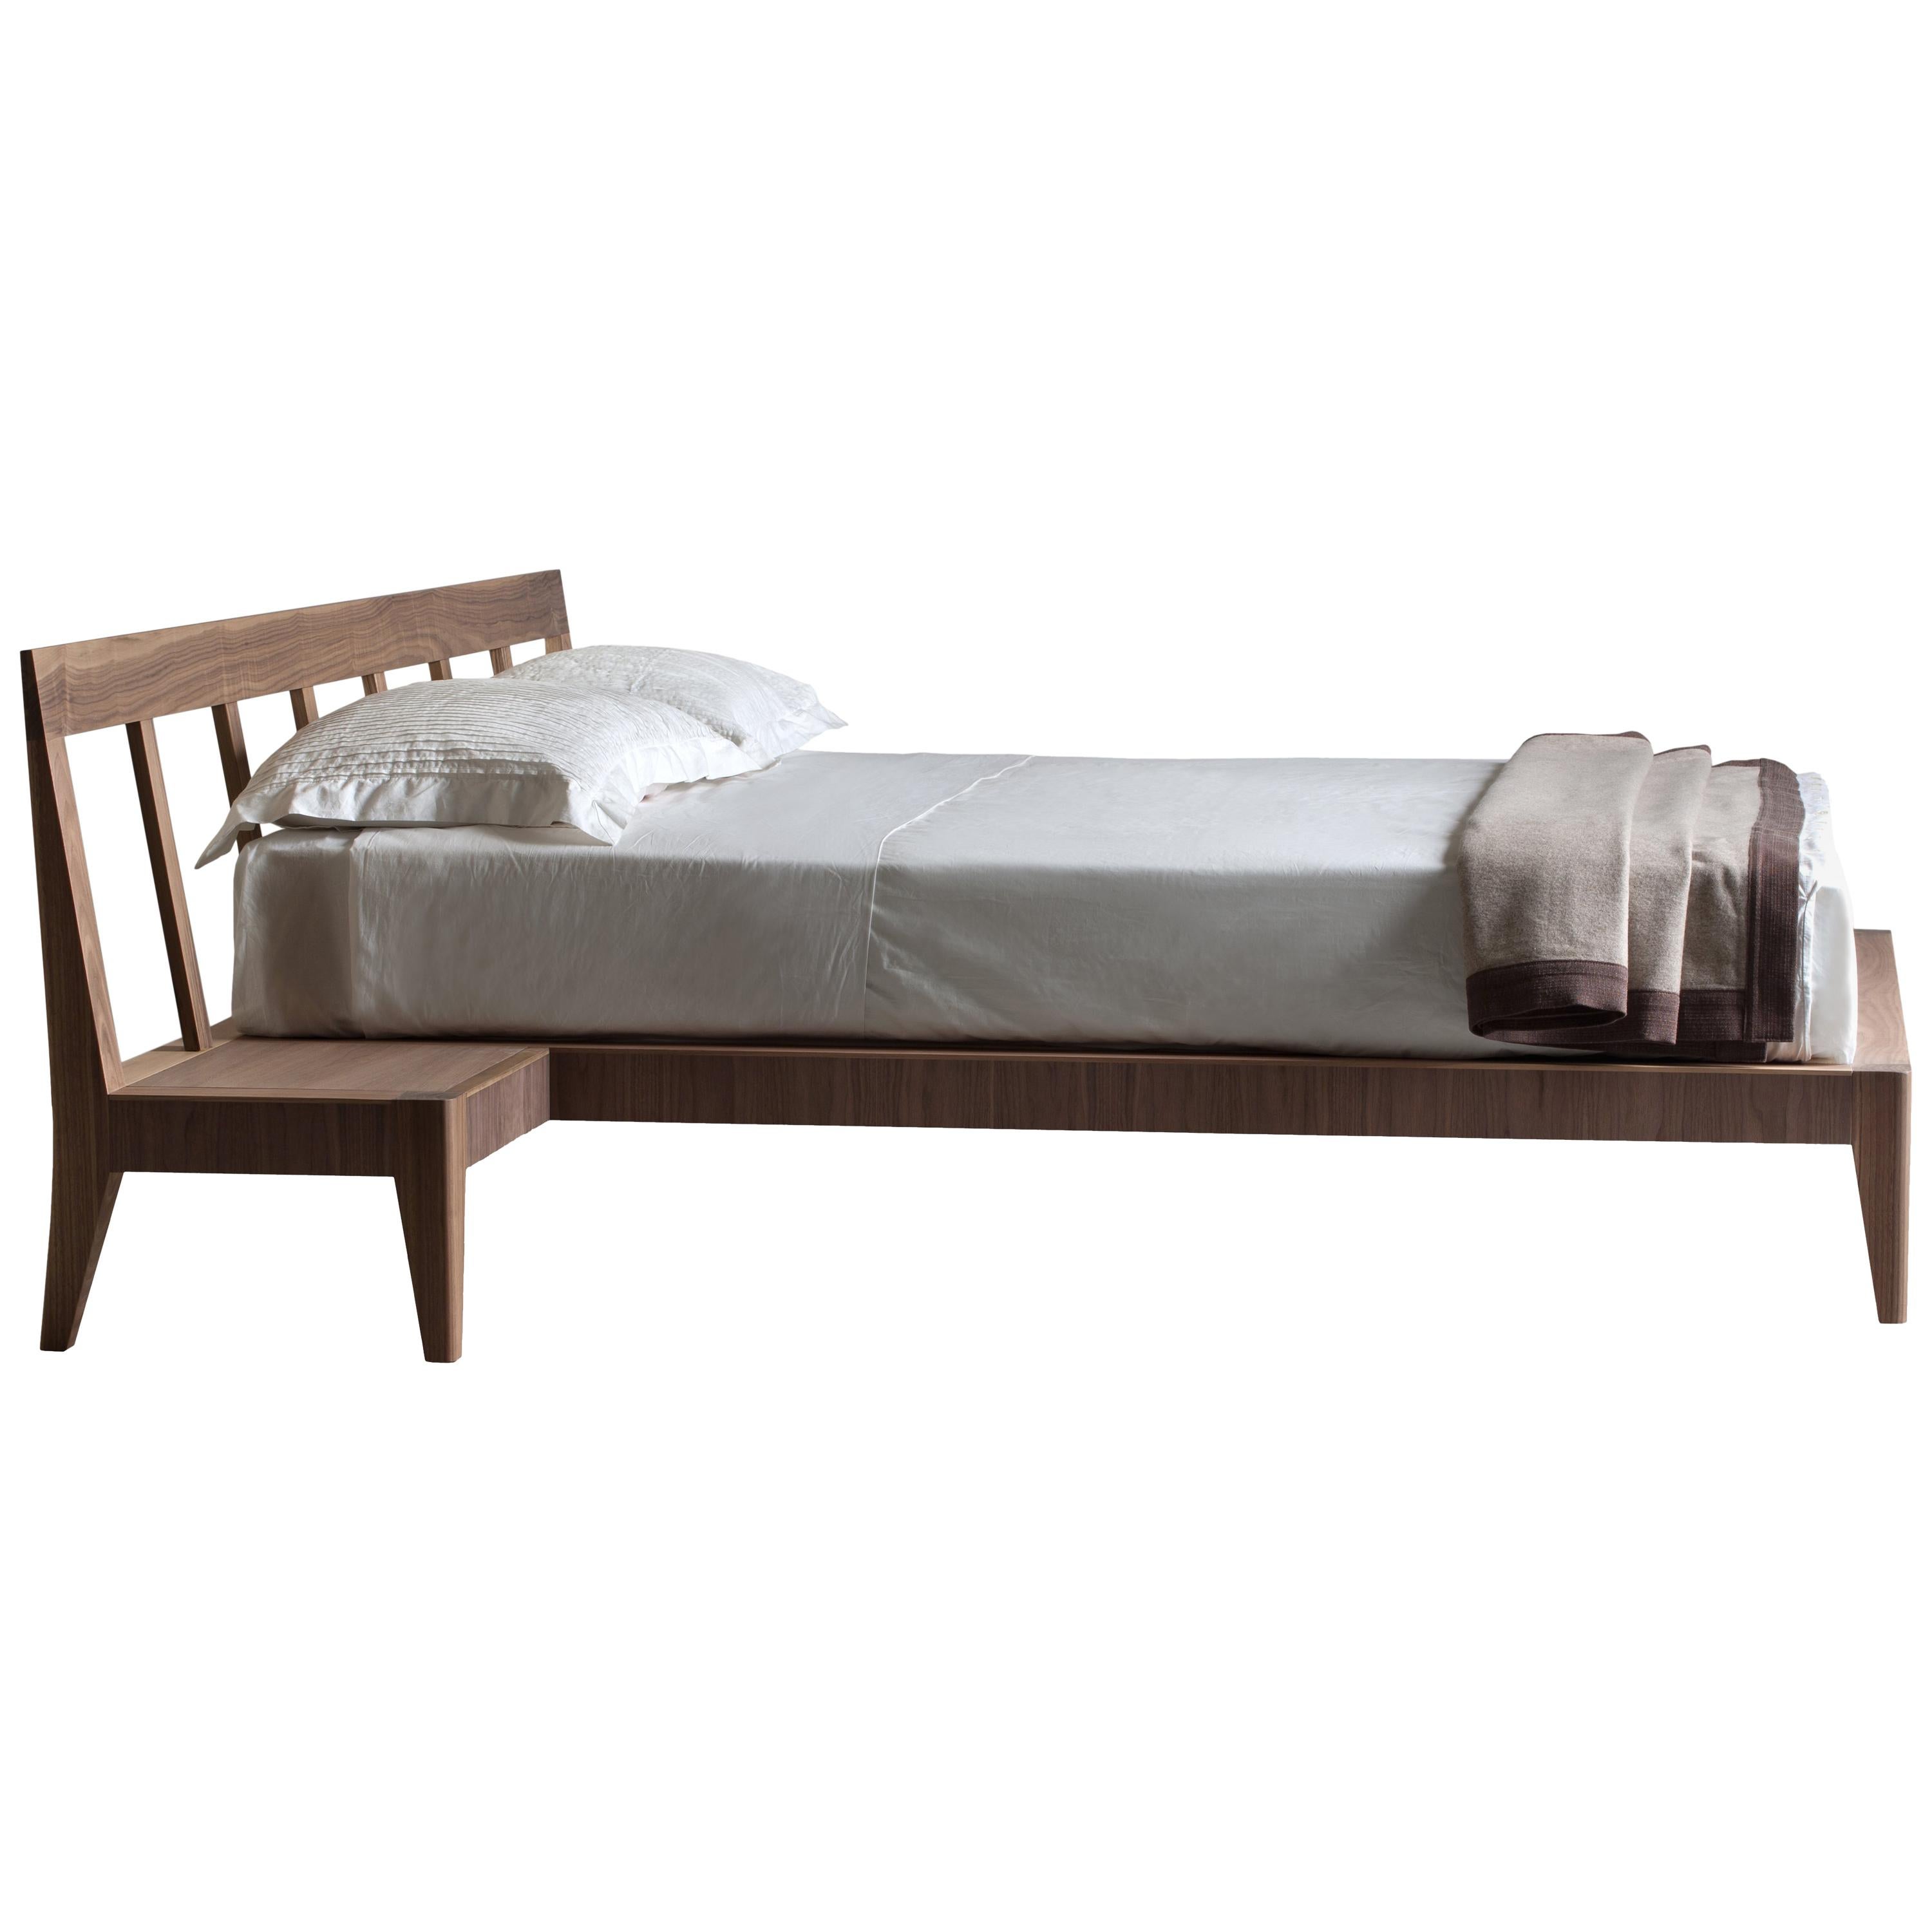 Magic Dream, Contemporary Bed in Ashwood with 2 Drawers, by Morelato